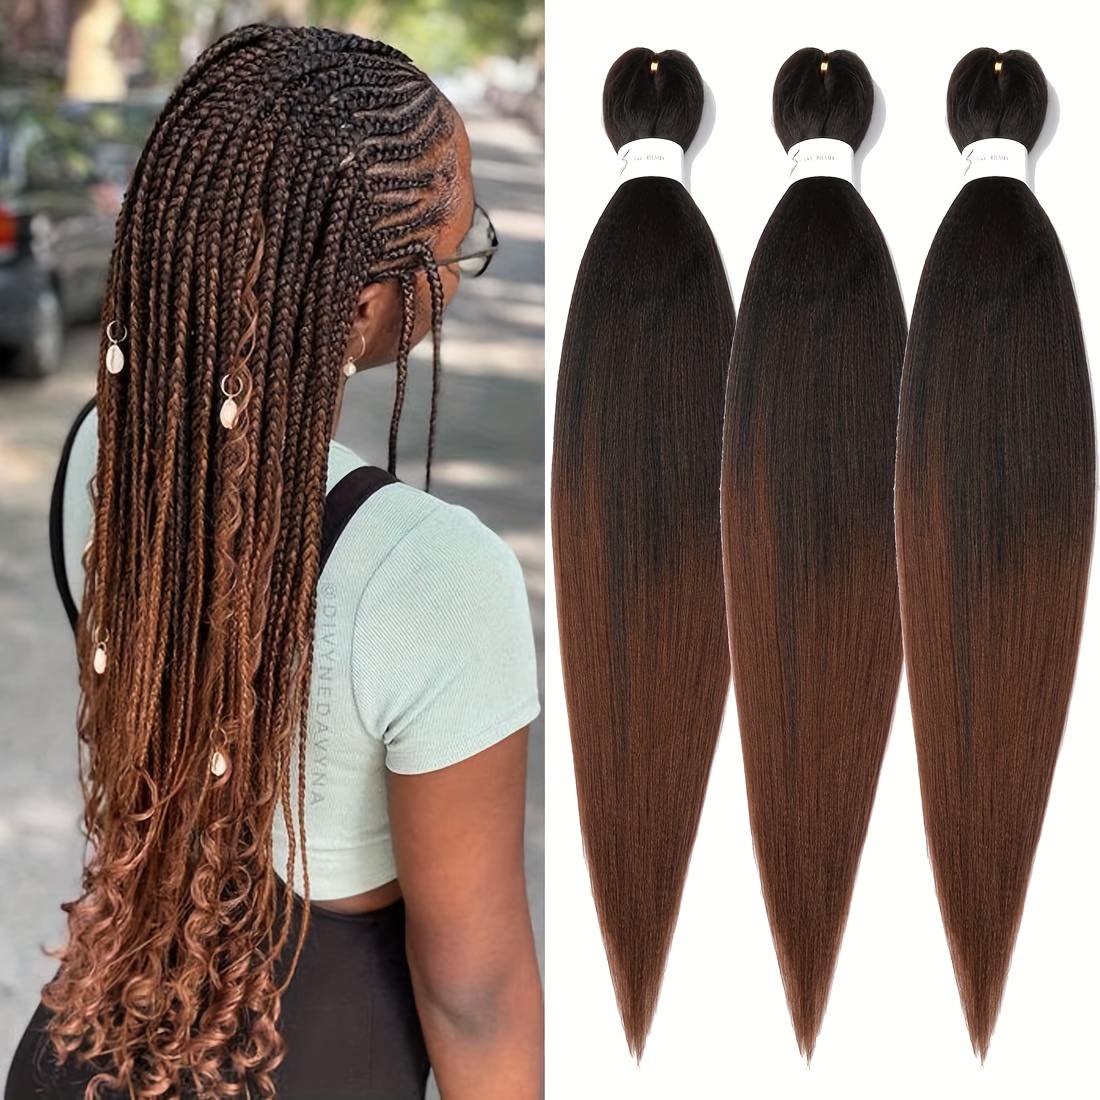 Pre-Stretched Braiding Hair - 30 Inch Natural Hair Extension Braiding Hair  Pre-Stretched Professional Synthetic Fiber Crochet Hair Hot Water Setting